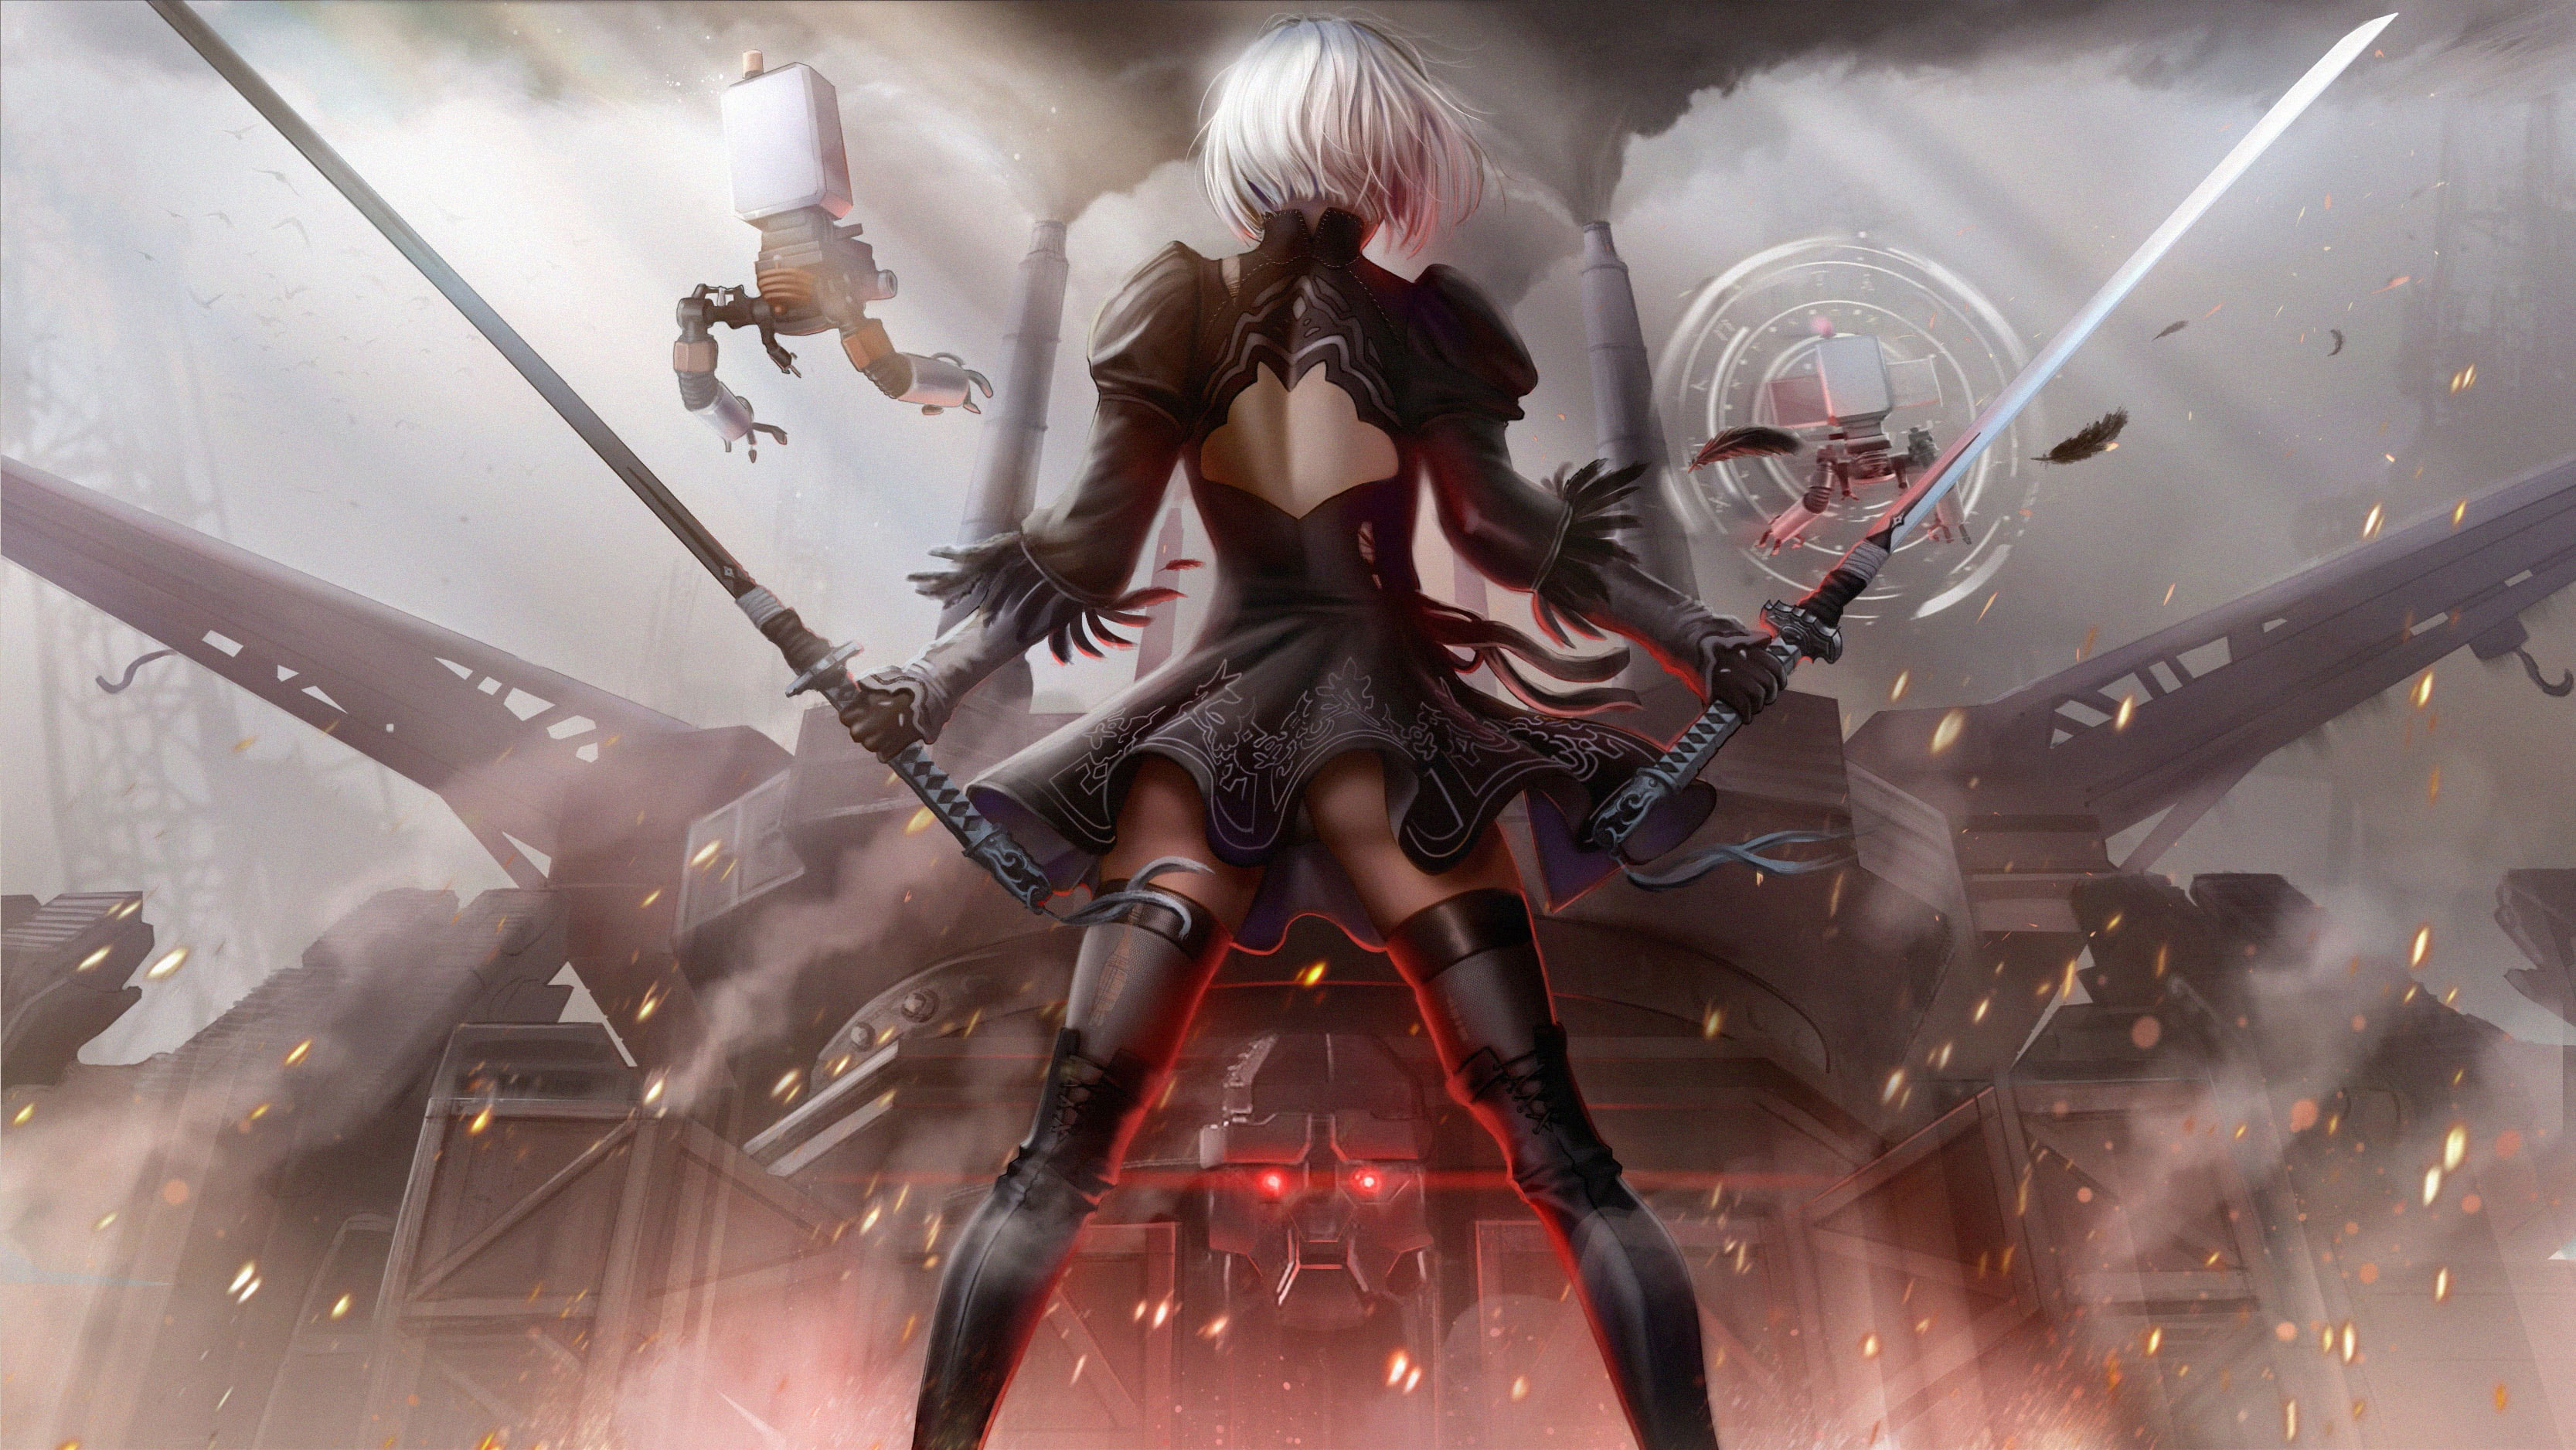 Download Nier Automata wallpapers for mobile phone free Nier Automata  HD pictures